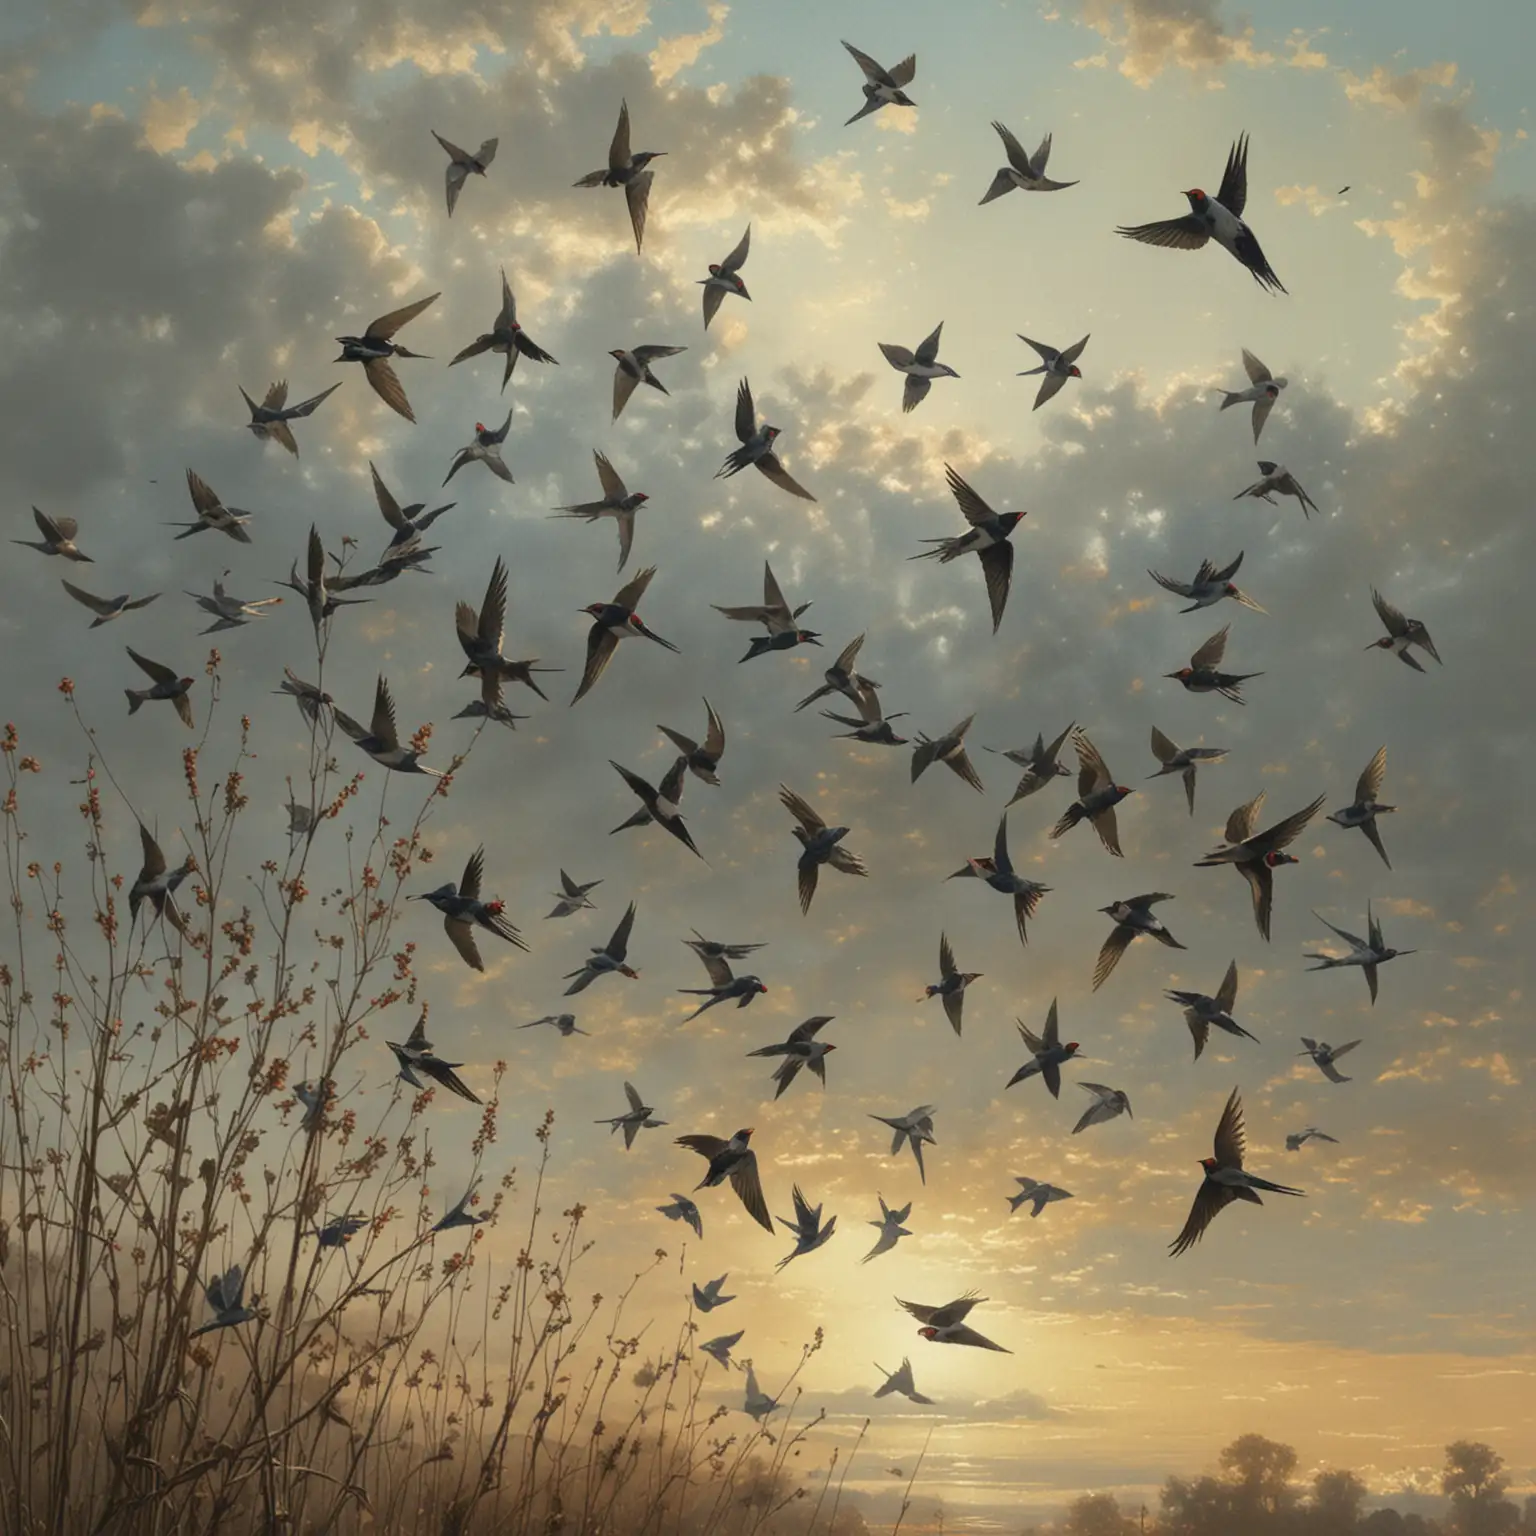 Flock of Swallows in Sunset Sky